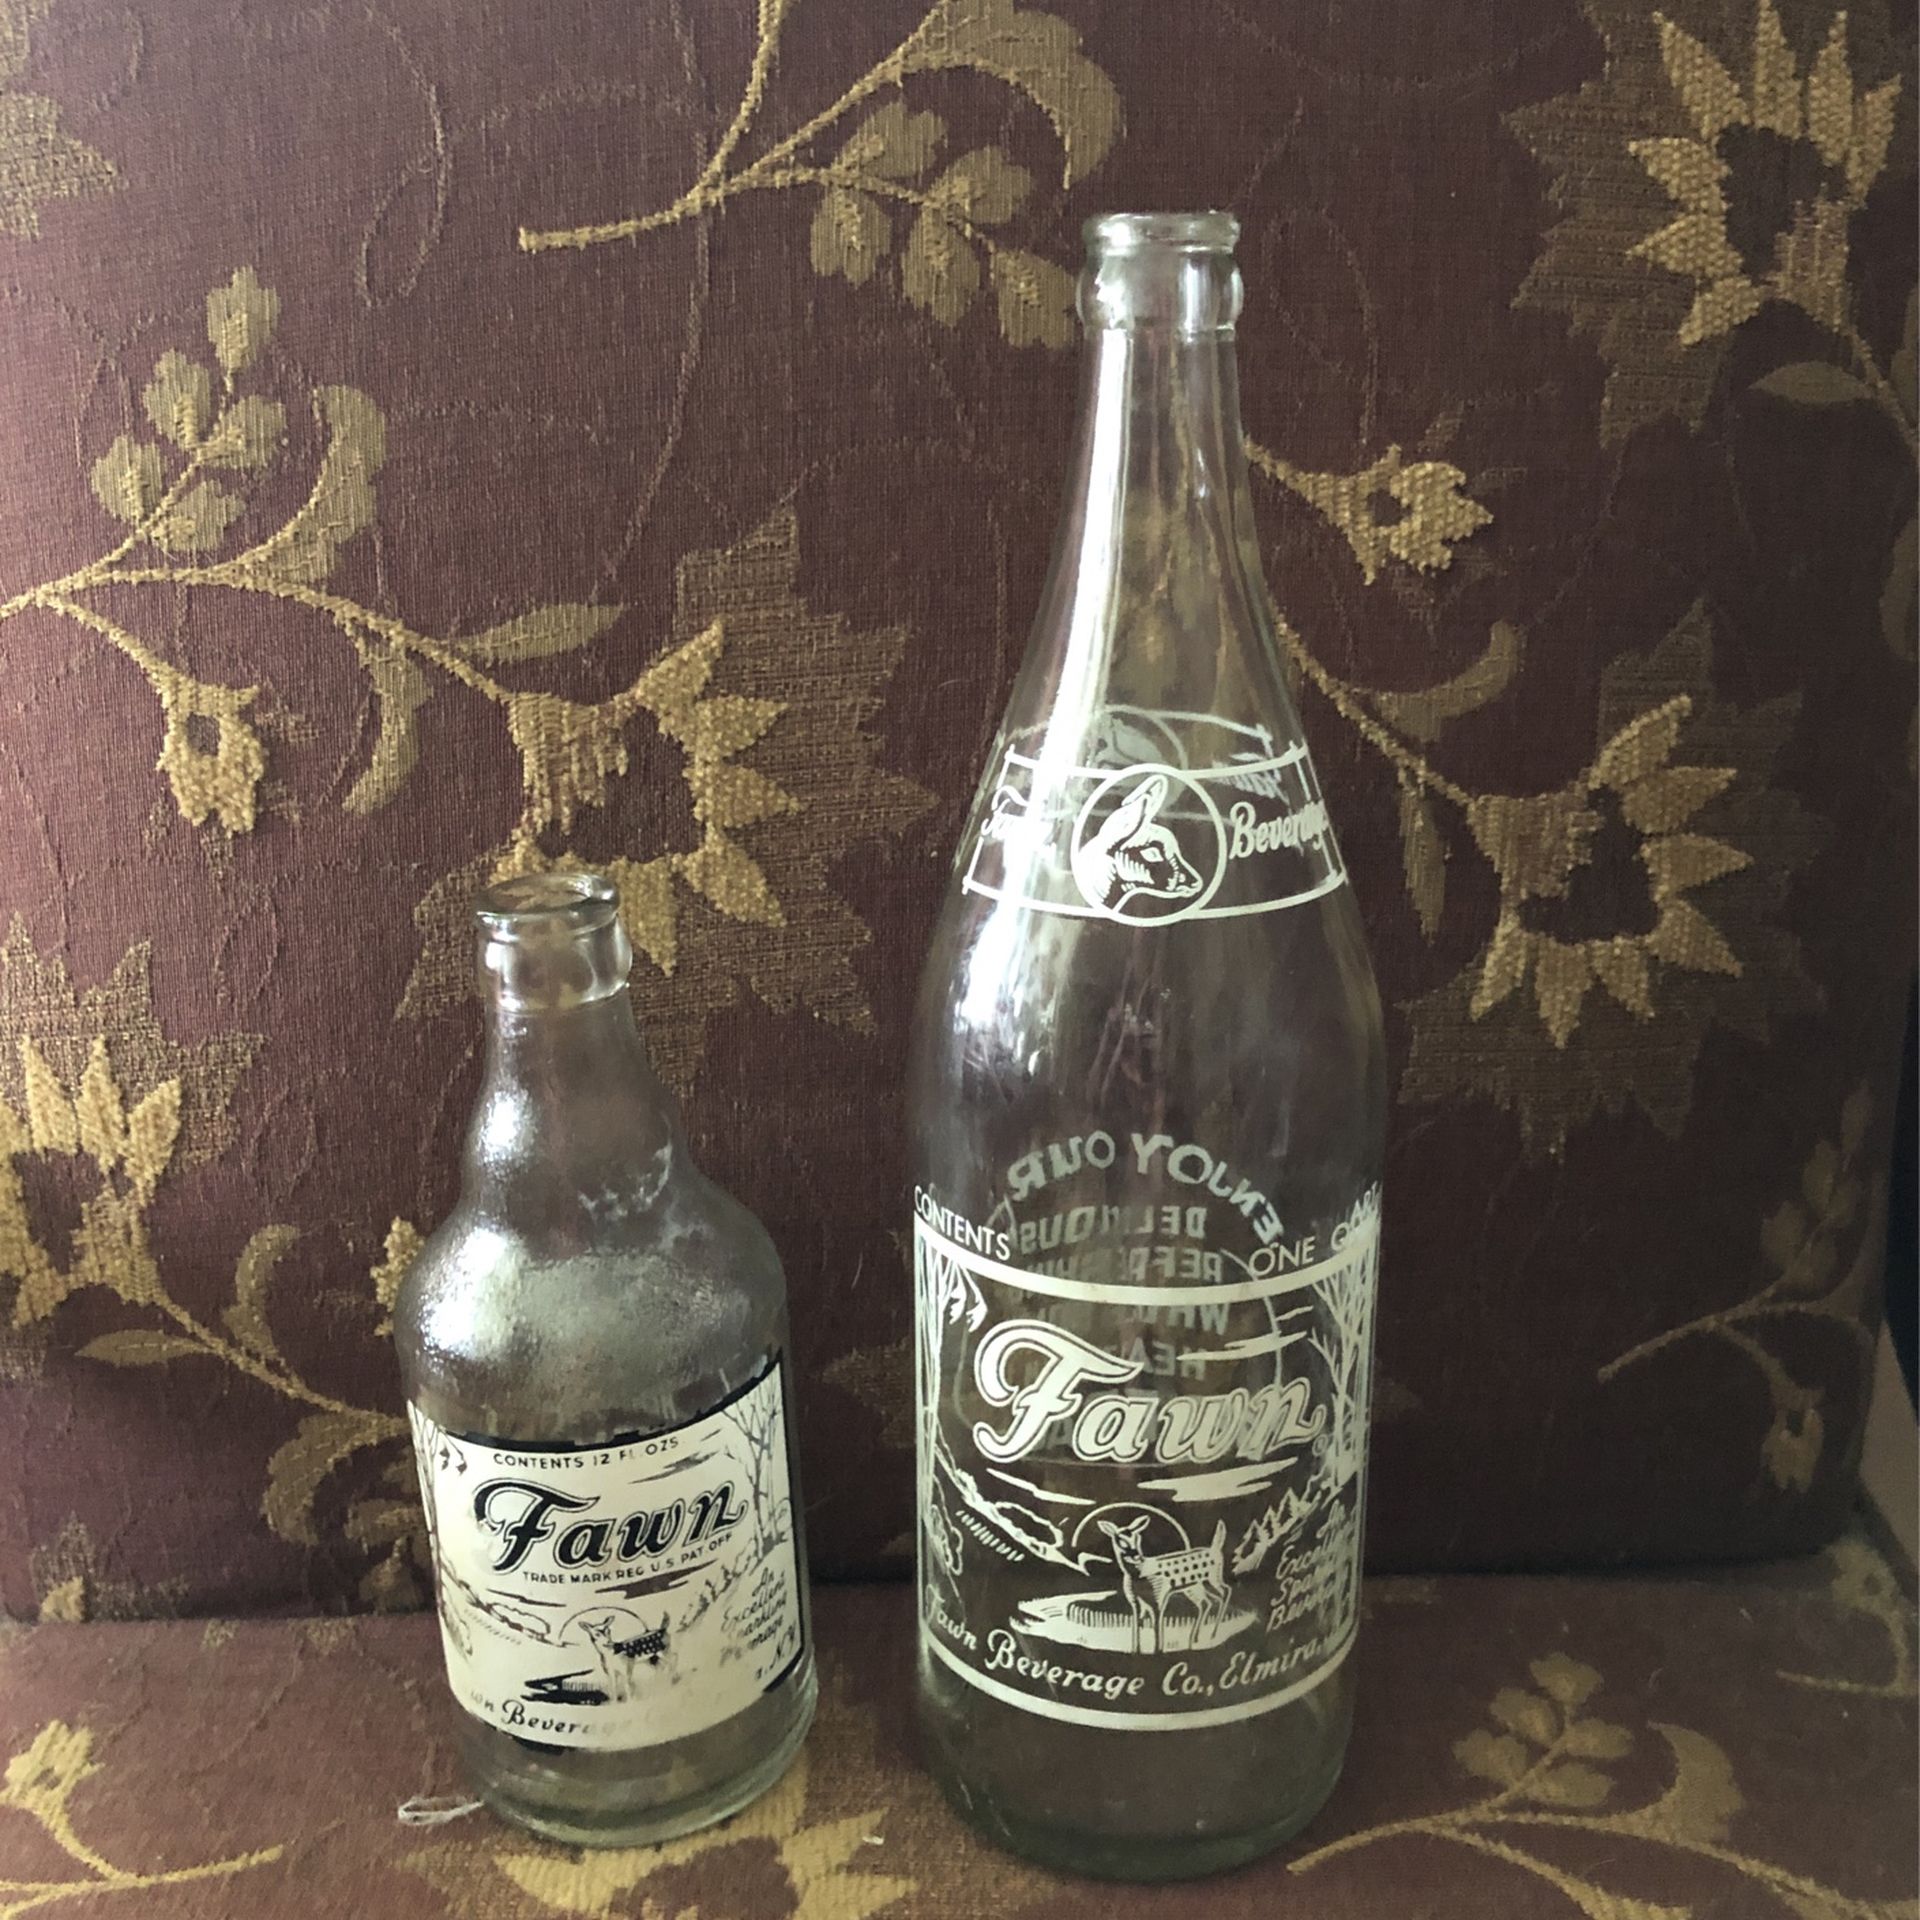 Old Fawn Beverage Pop Bottles, Co. Was In Elm. Hgts NY